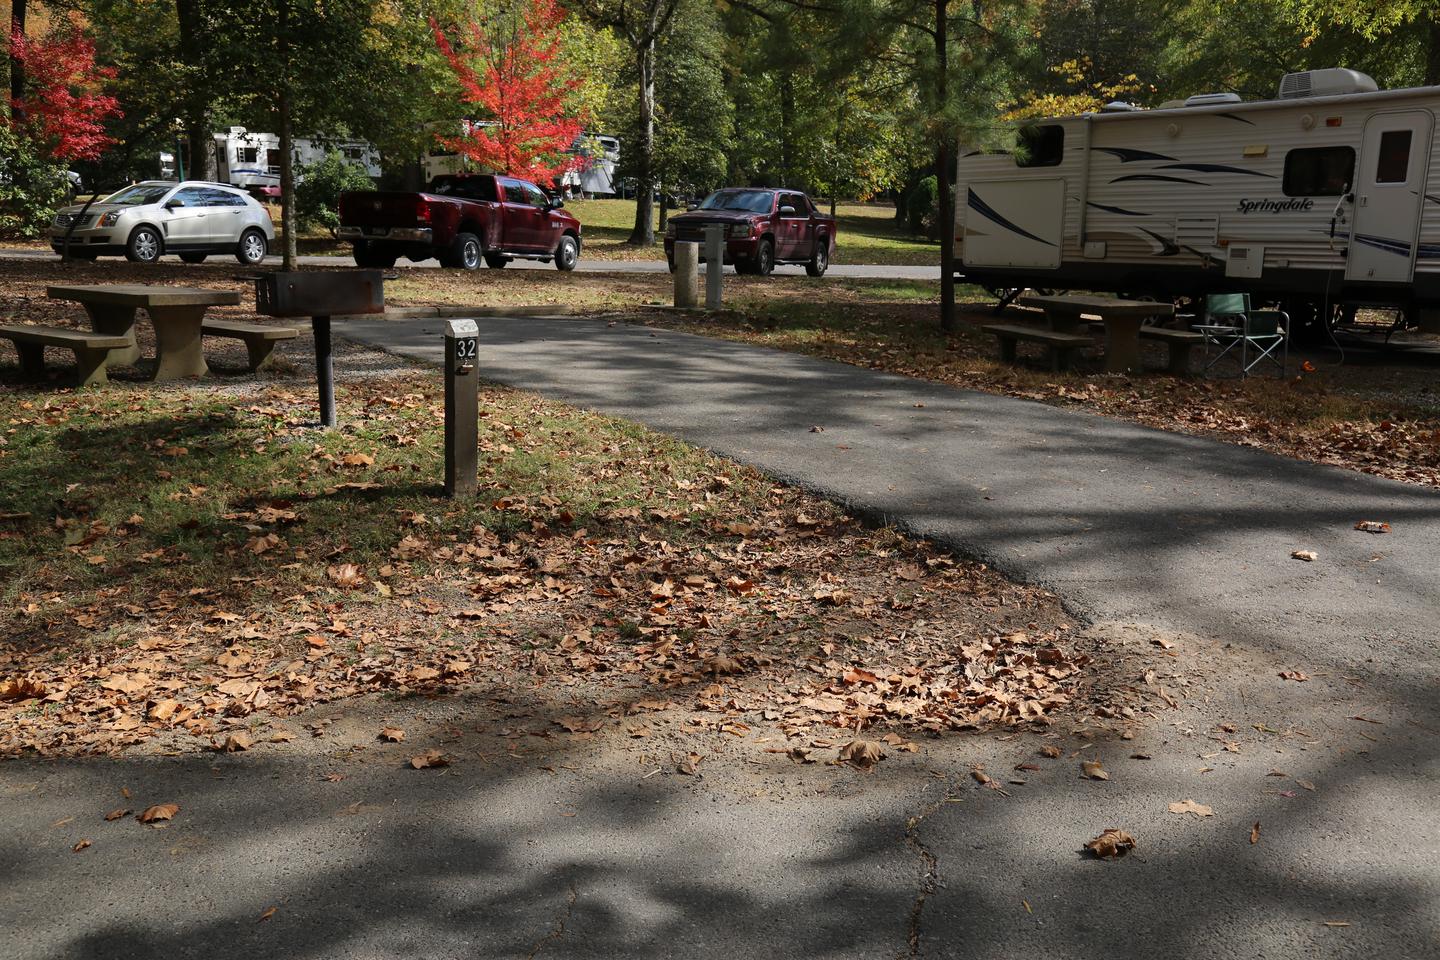 Empty paved campsite with a grill and picnic table to the right with trees surrounded and leaves on the ground.Campsite 32